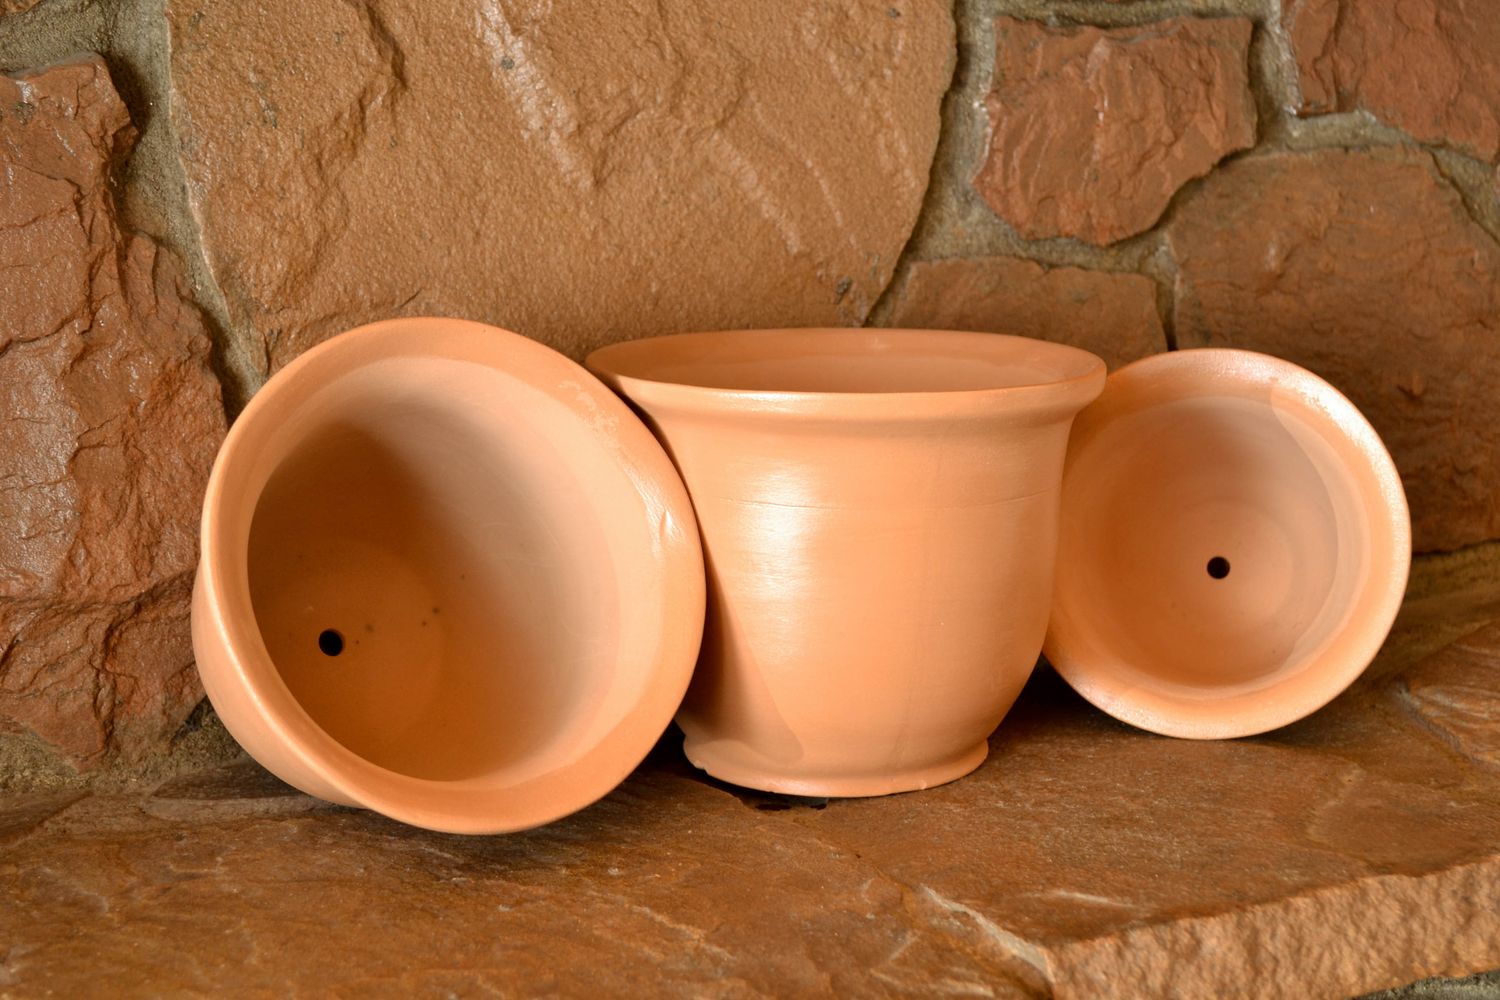 Set of three ceramic flower pots 5,5 inches tall and 7 inches wide without any patterns 3,3 lb photo 1